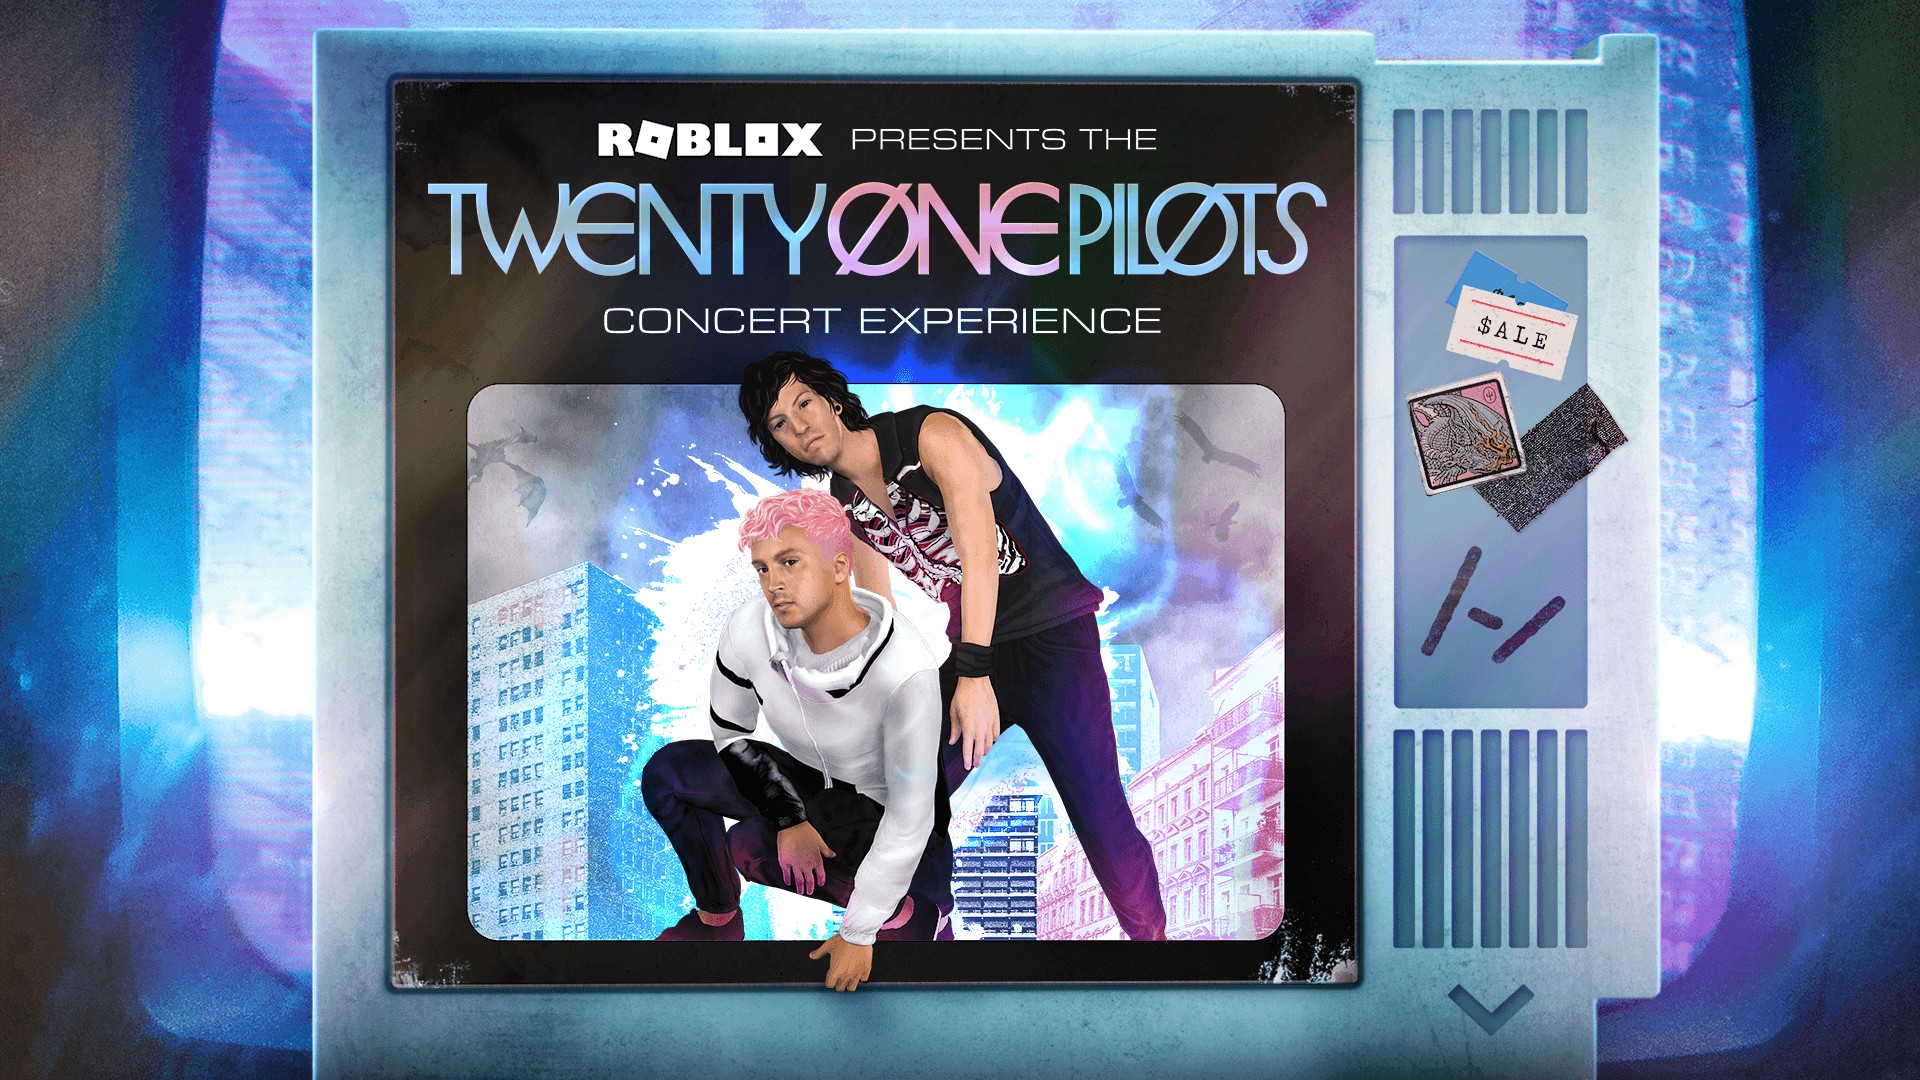 Video For Join Twenty One Pilots’ Virtual Concert Experience on Roblox